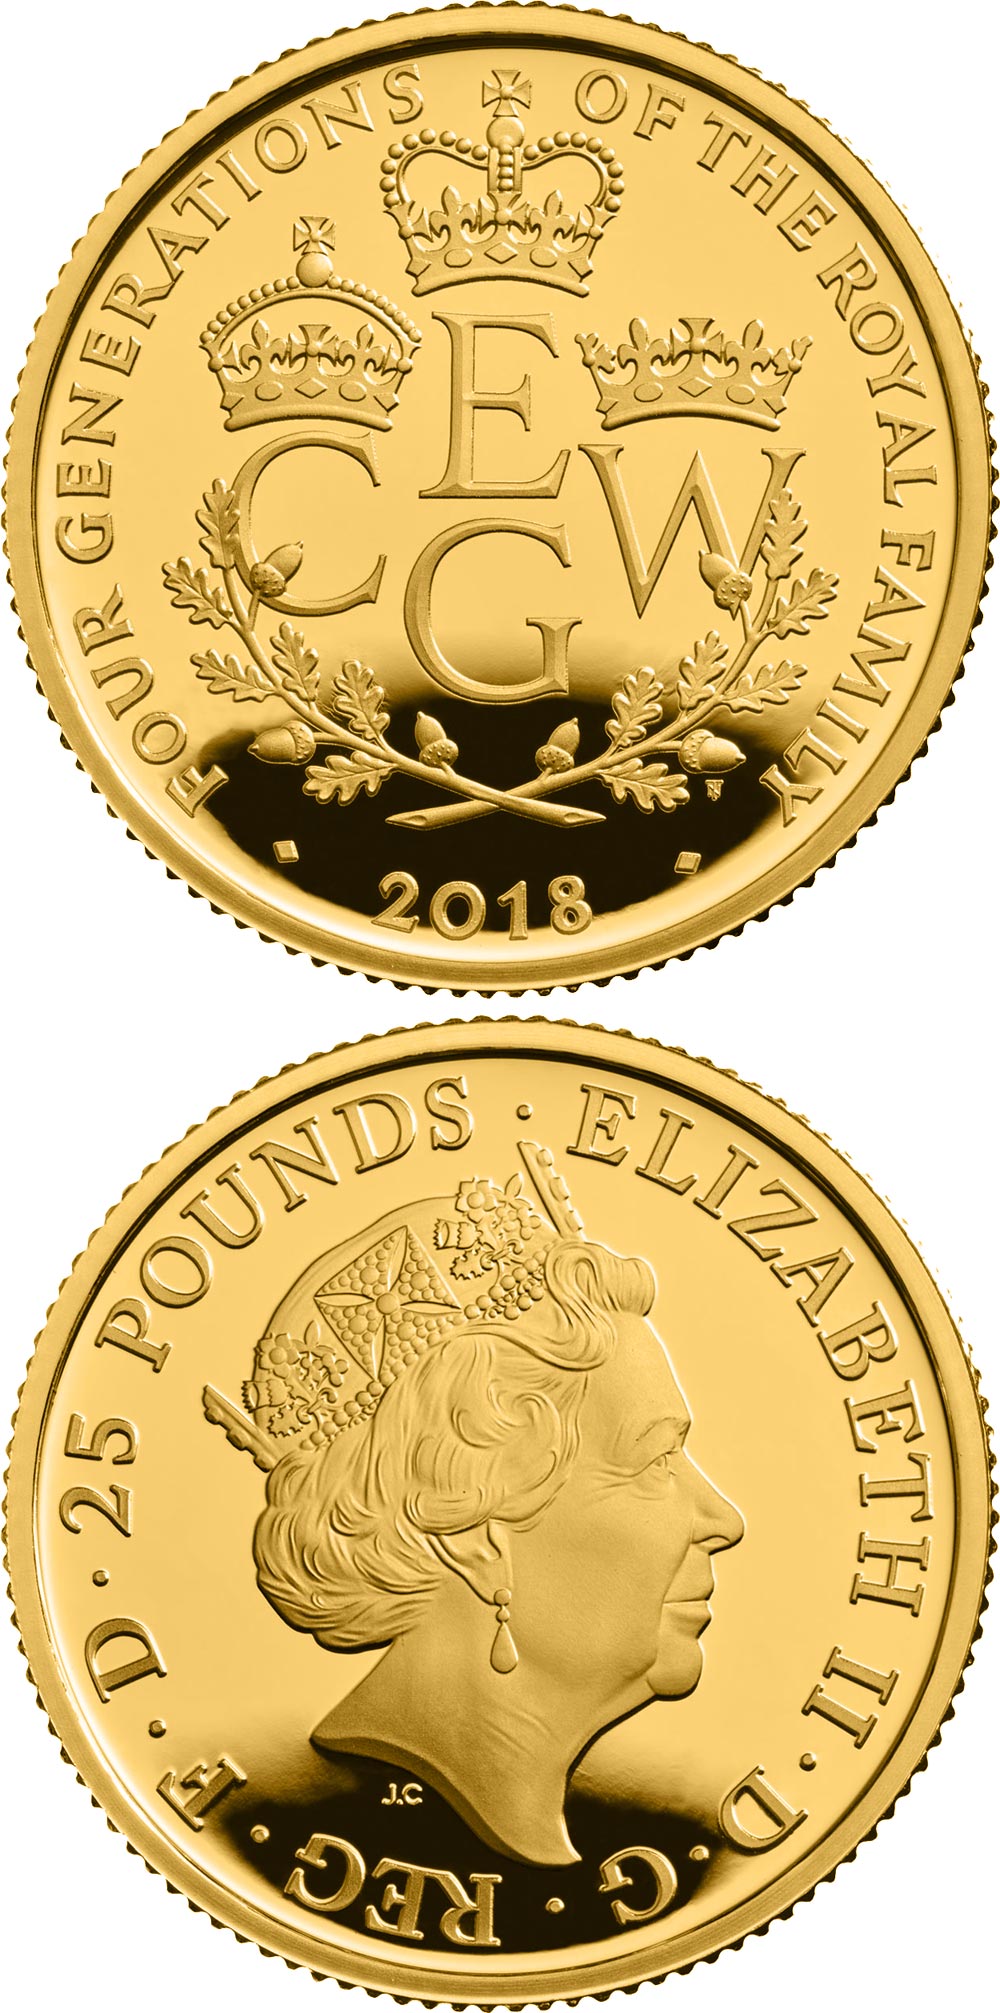 Image of 25 pounds coin - The Four Generations of Royalty | United Kingdom 2018.  The Gold coin is of Proof quality.